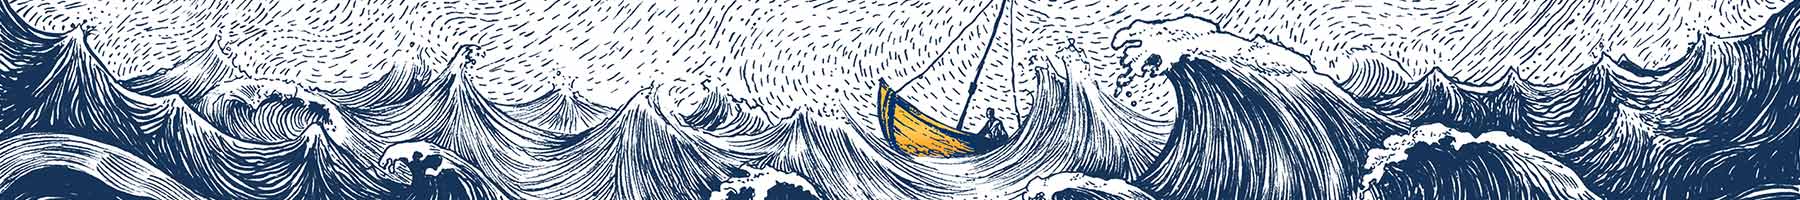 ink drawing of a small yellow boat on a stormy sea